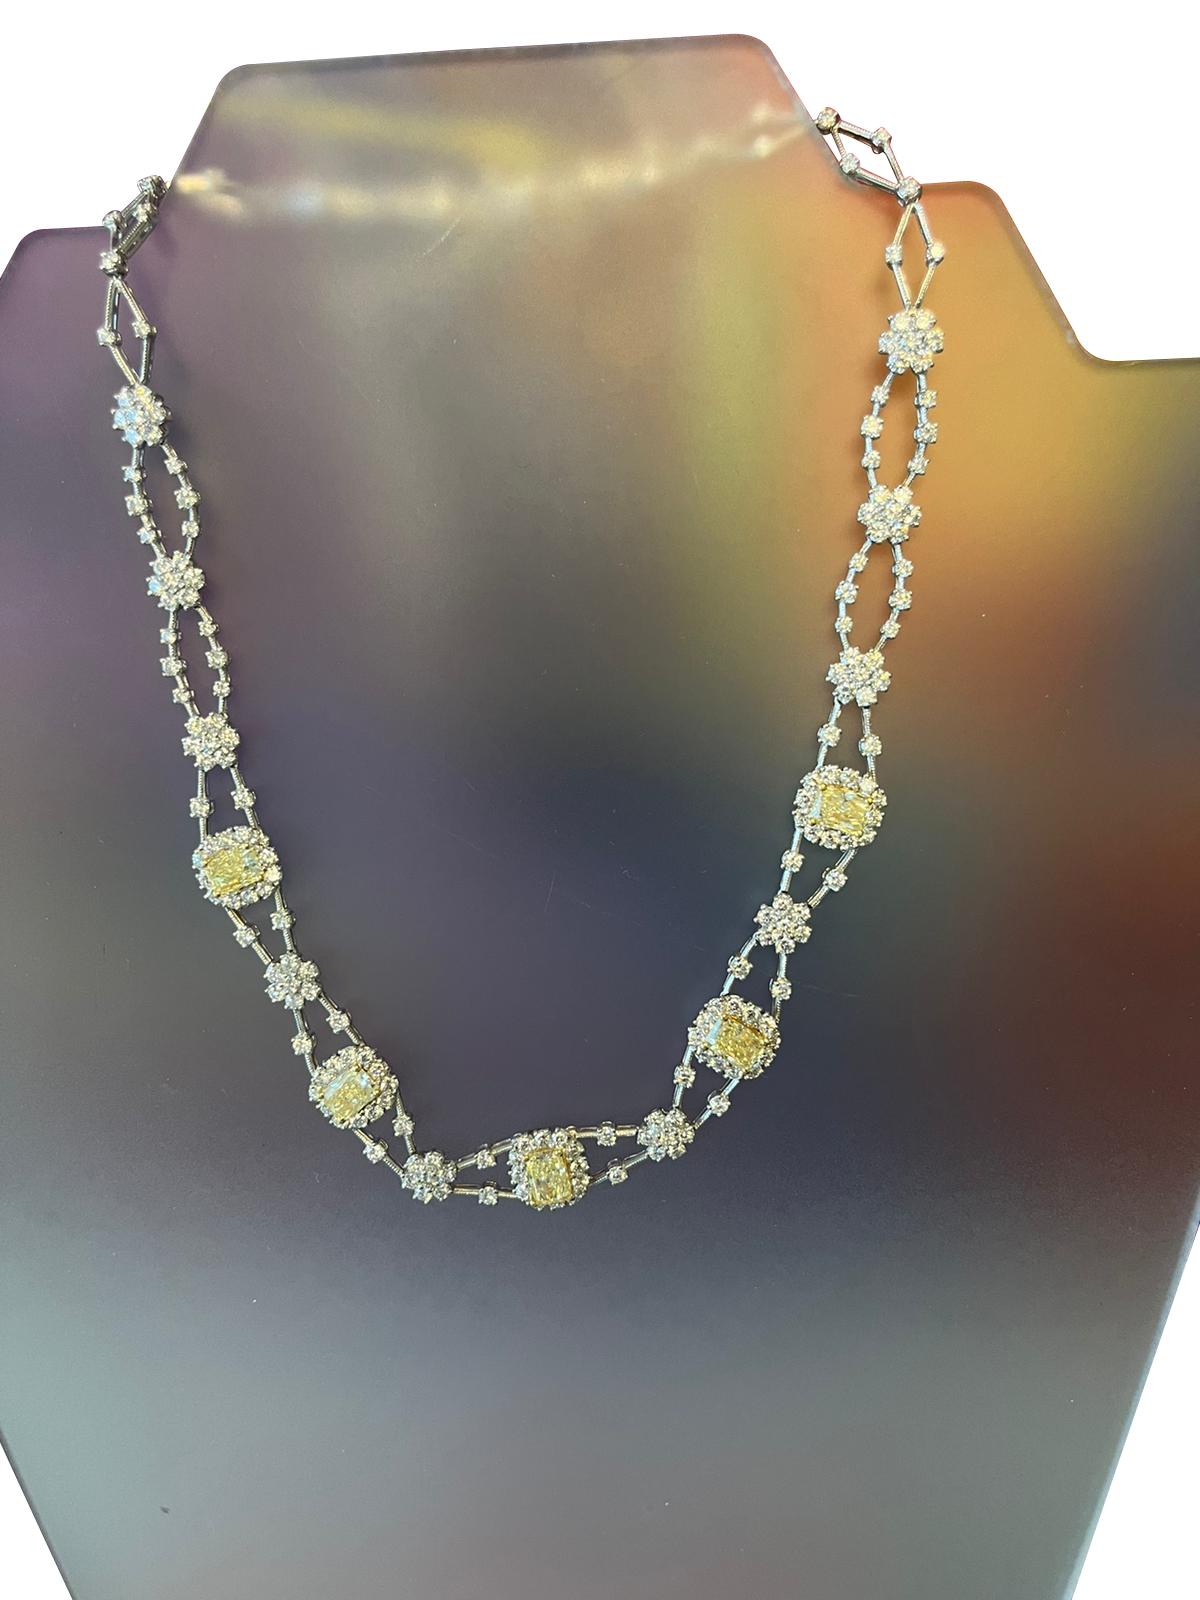 This Natural Radiant Cut with Fancy Diamonds Necklace Features 11.8ctw of Yellow Radiant Diamonds. Beautiful necklace made of diamonds. an essential piece of jewelry. in 14-karat white gold. The necklace is also encrusted with sparkling Fancy White